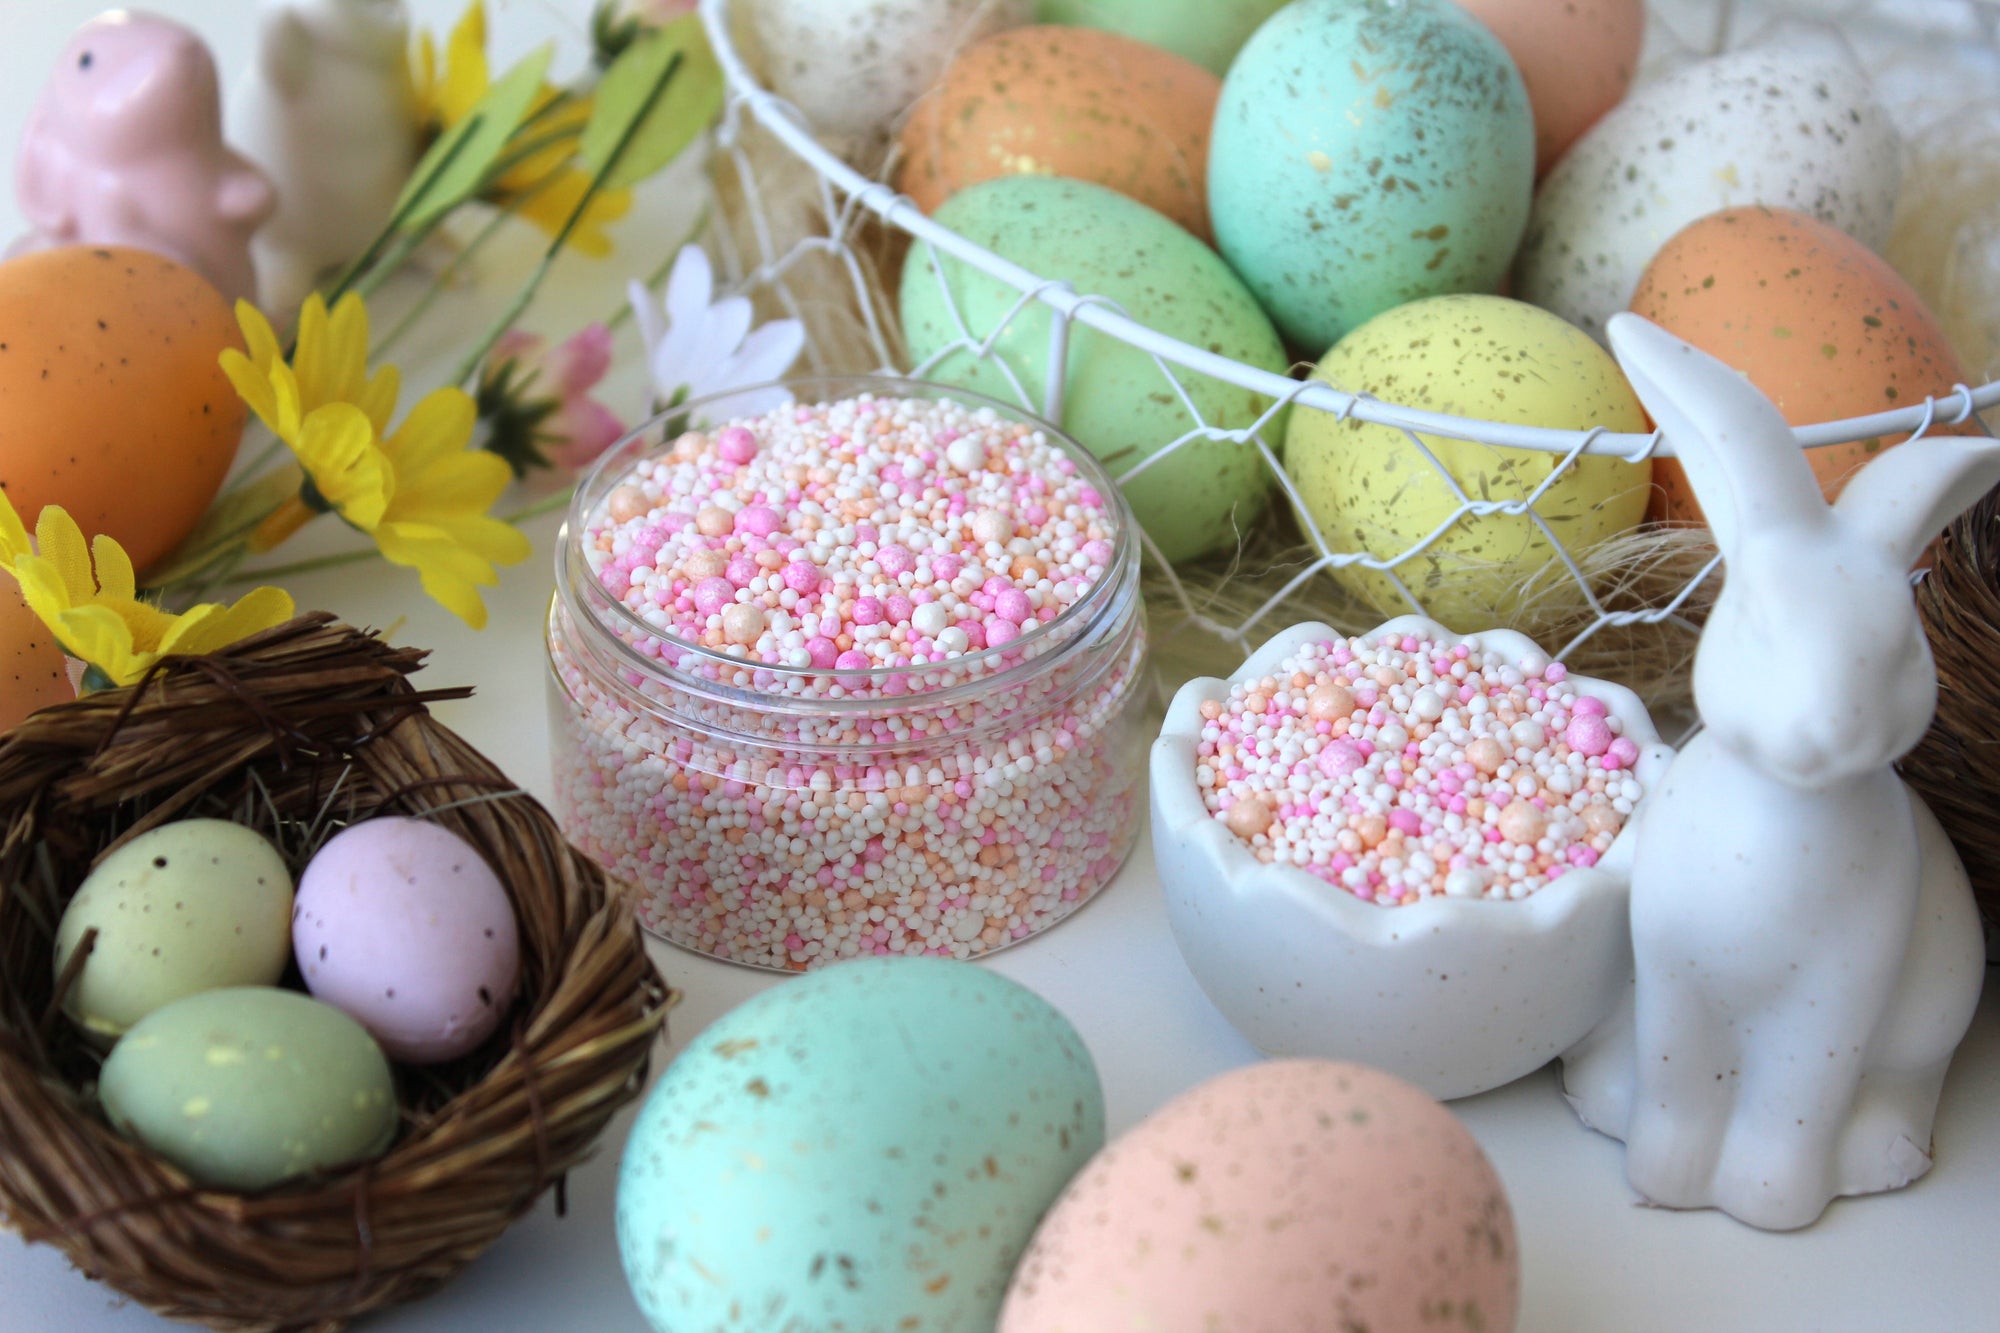 PEACHY BUNNY - Easter Sprinkle Collection 100g